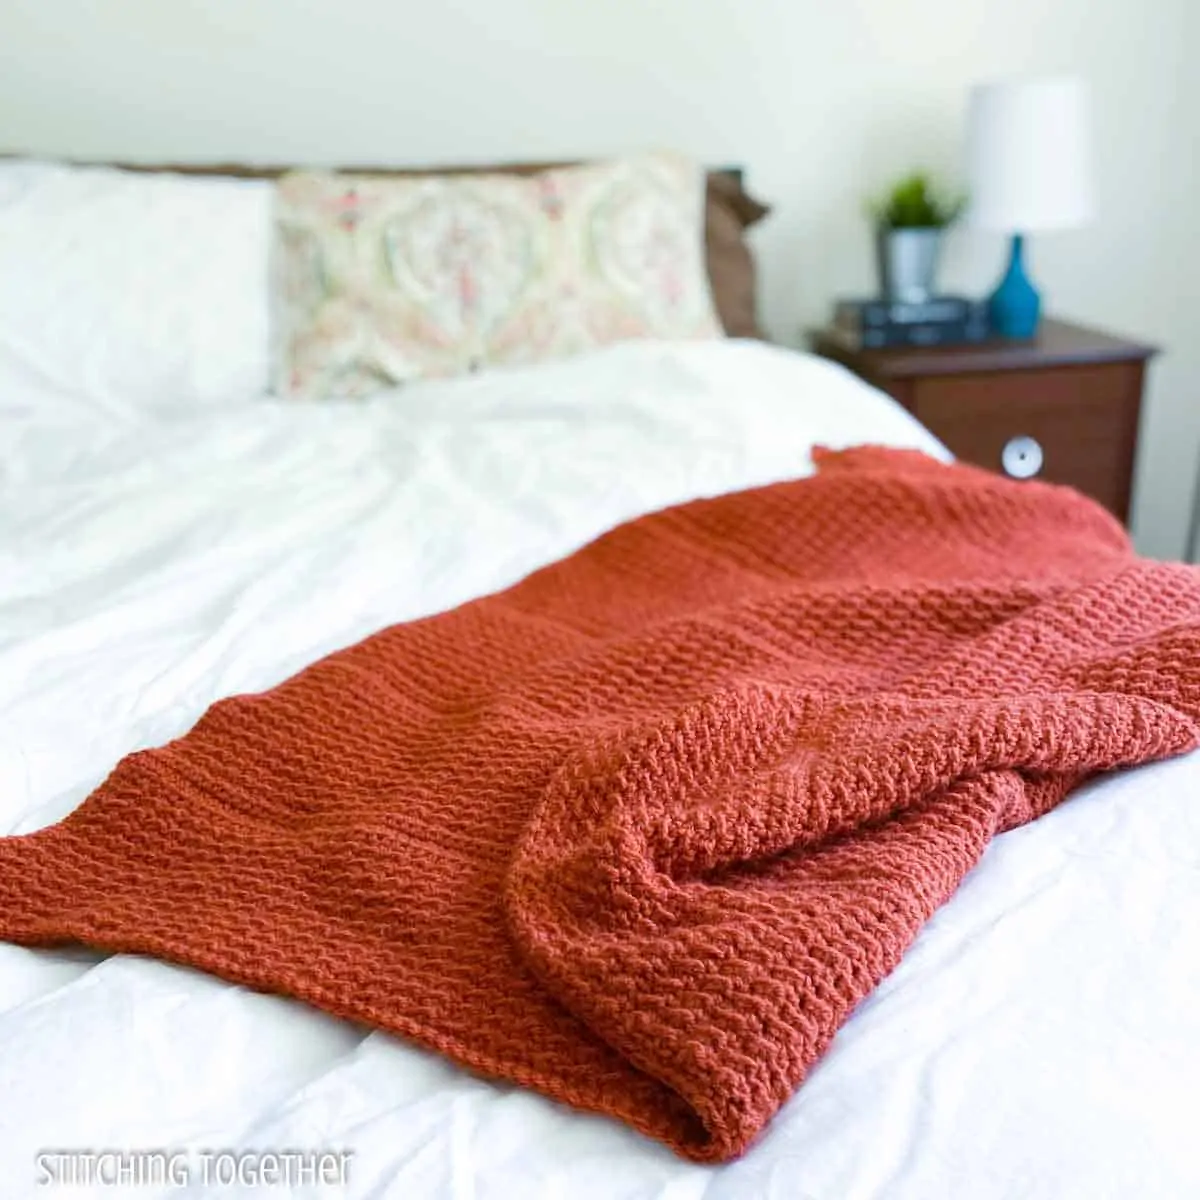 terracotta crochet lap throw draped on a bed